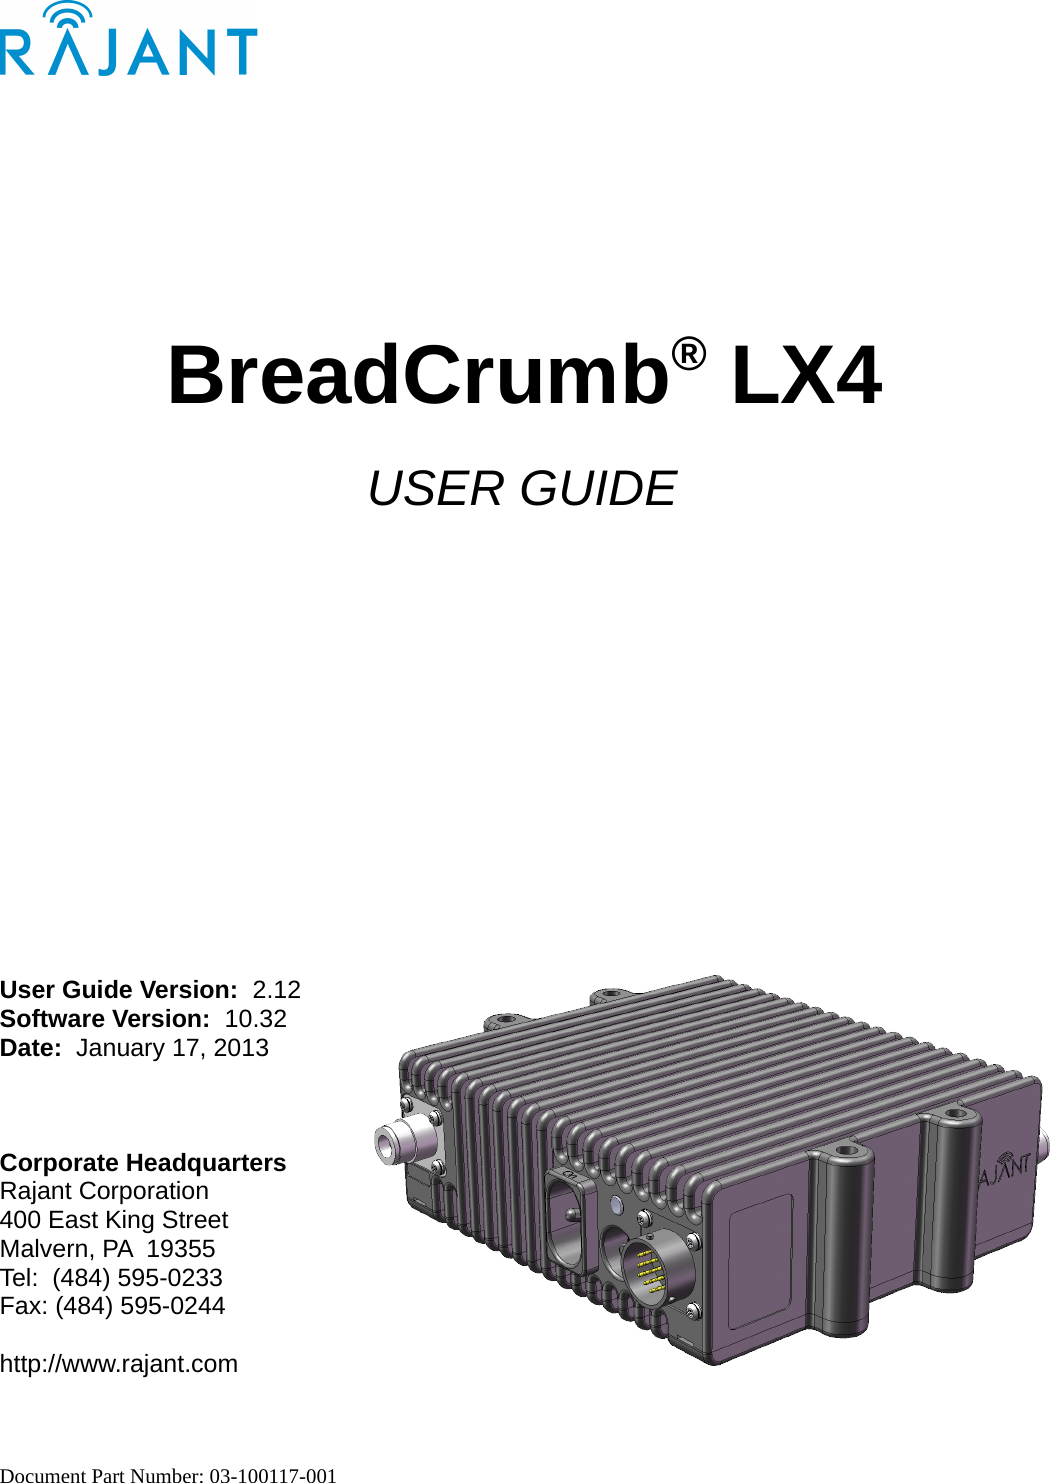 BreadCrumb® LX4USER GUIDEUser Guide Version:  2.12Software Version:  10.32Date:  January 17, 2013Corporate HeadquartersRajant Corporation400 East King StreetMalvern, PA  19355Tel:  (484) 595-0233Fax: (484) 595-0244http://www.rajant.comDocument Part Number: 03-100117-001